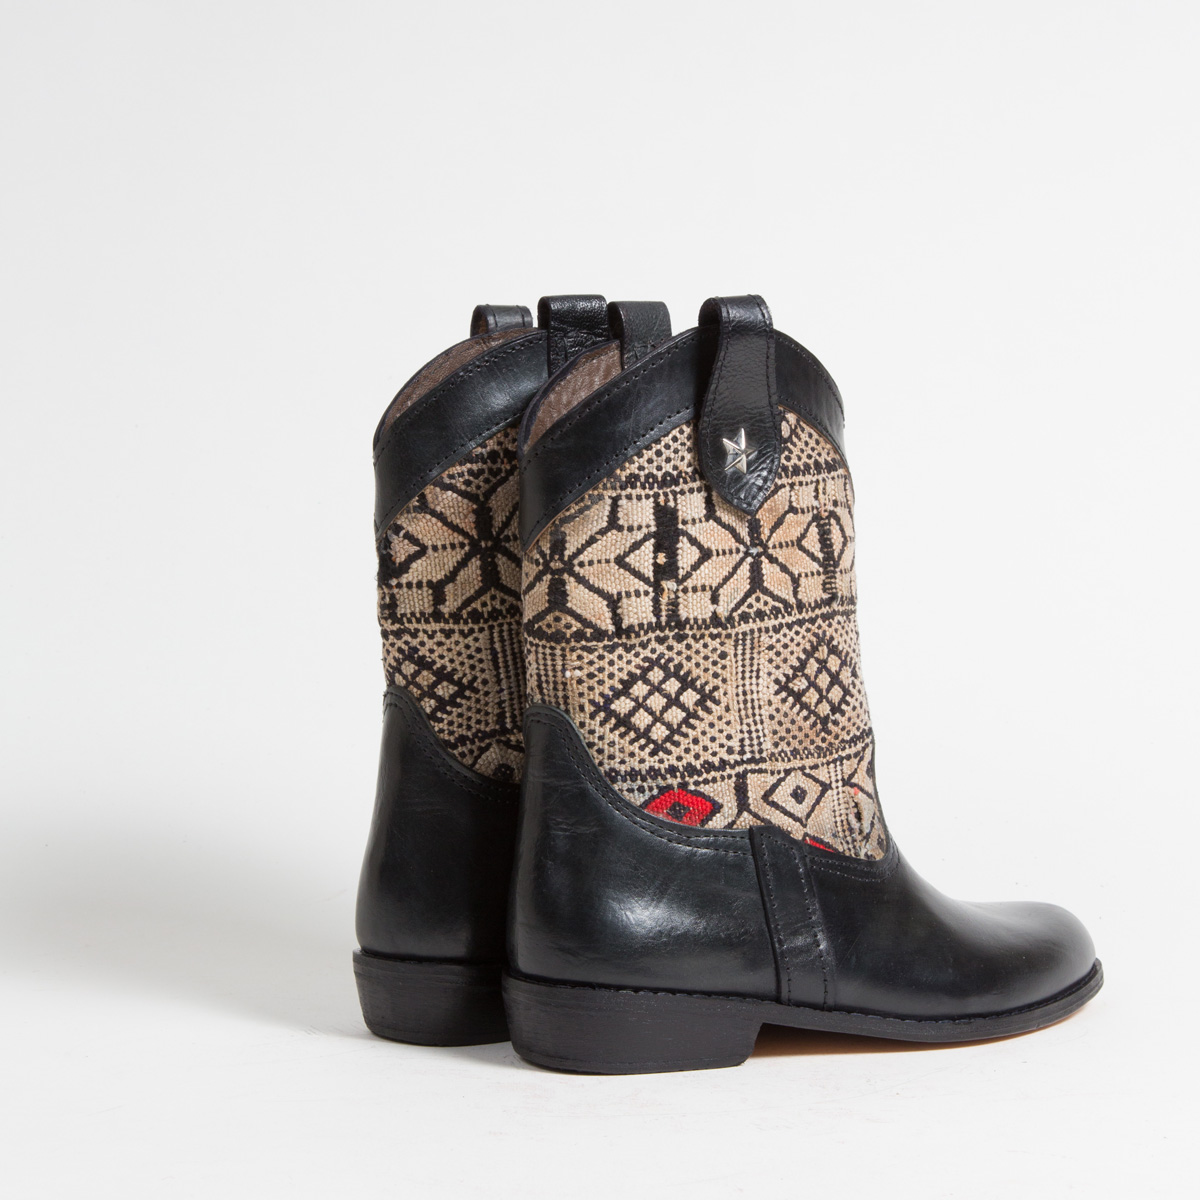 Bottines Kilim cuir mababouche artisanales (Réf. MN5-38)